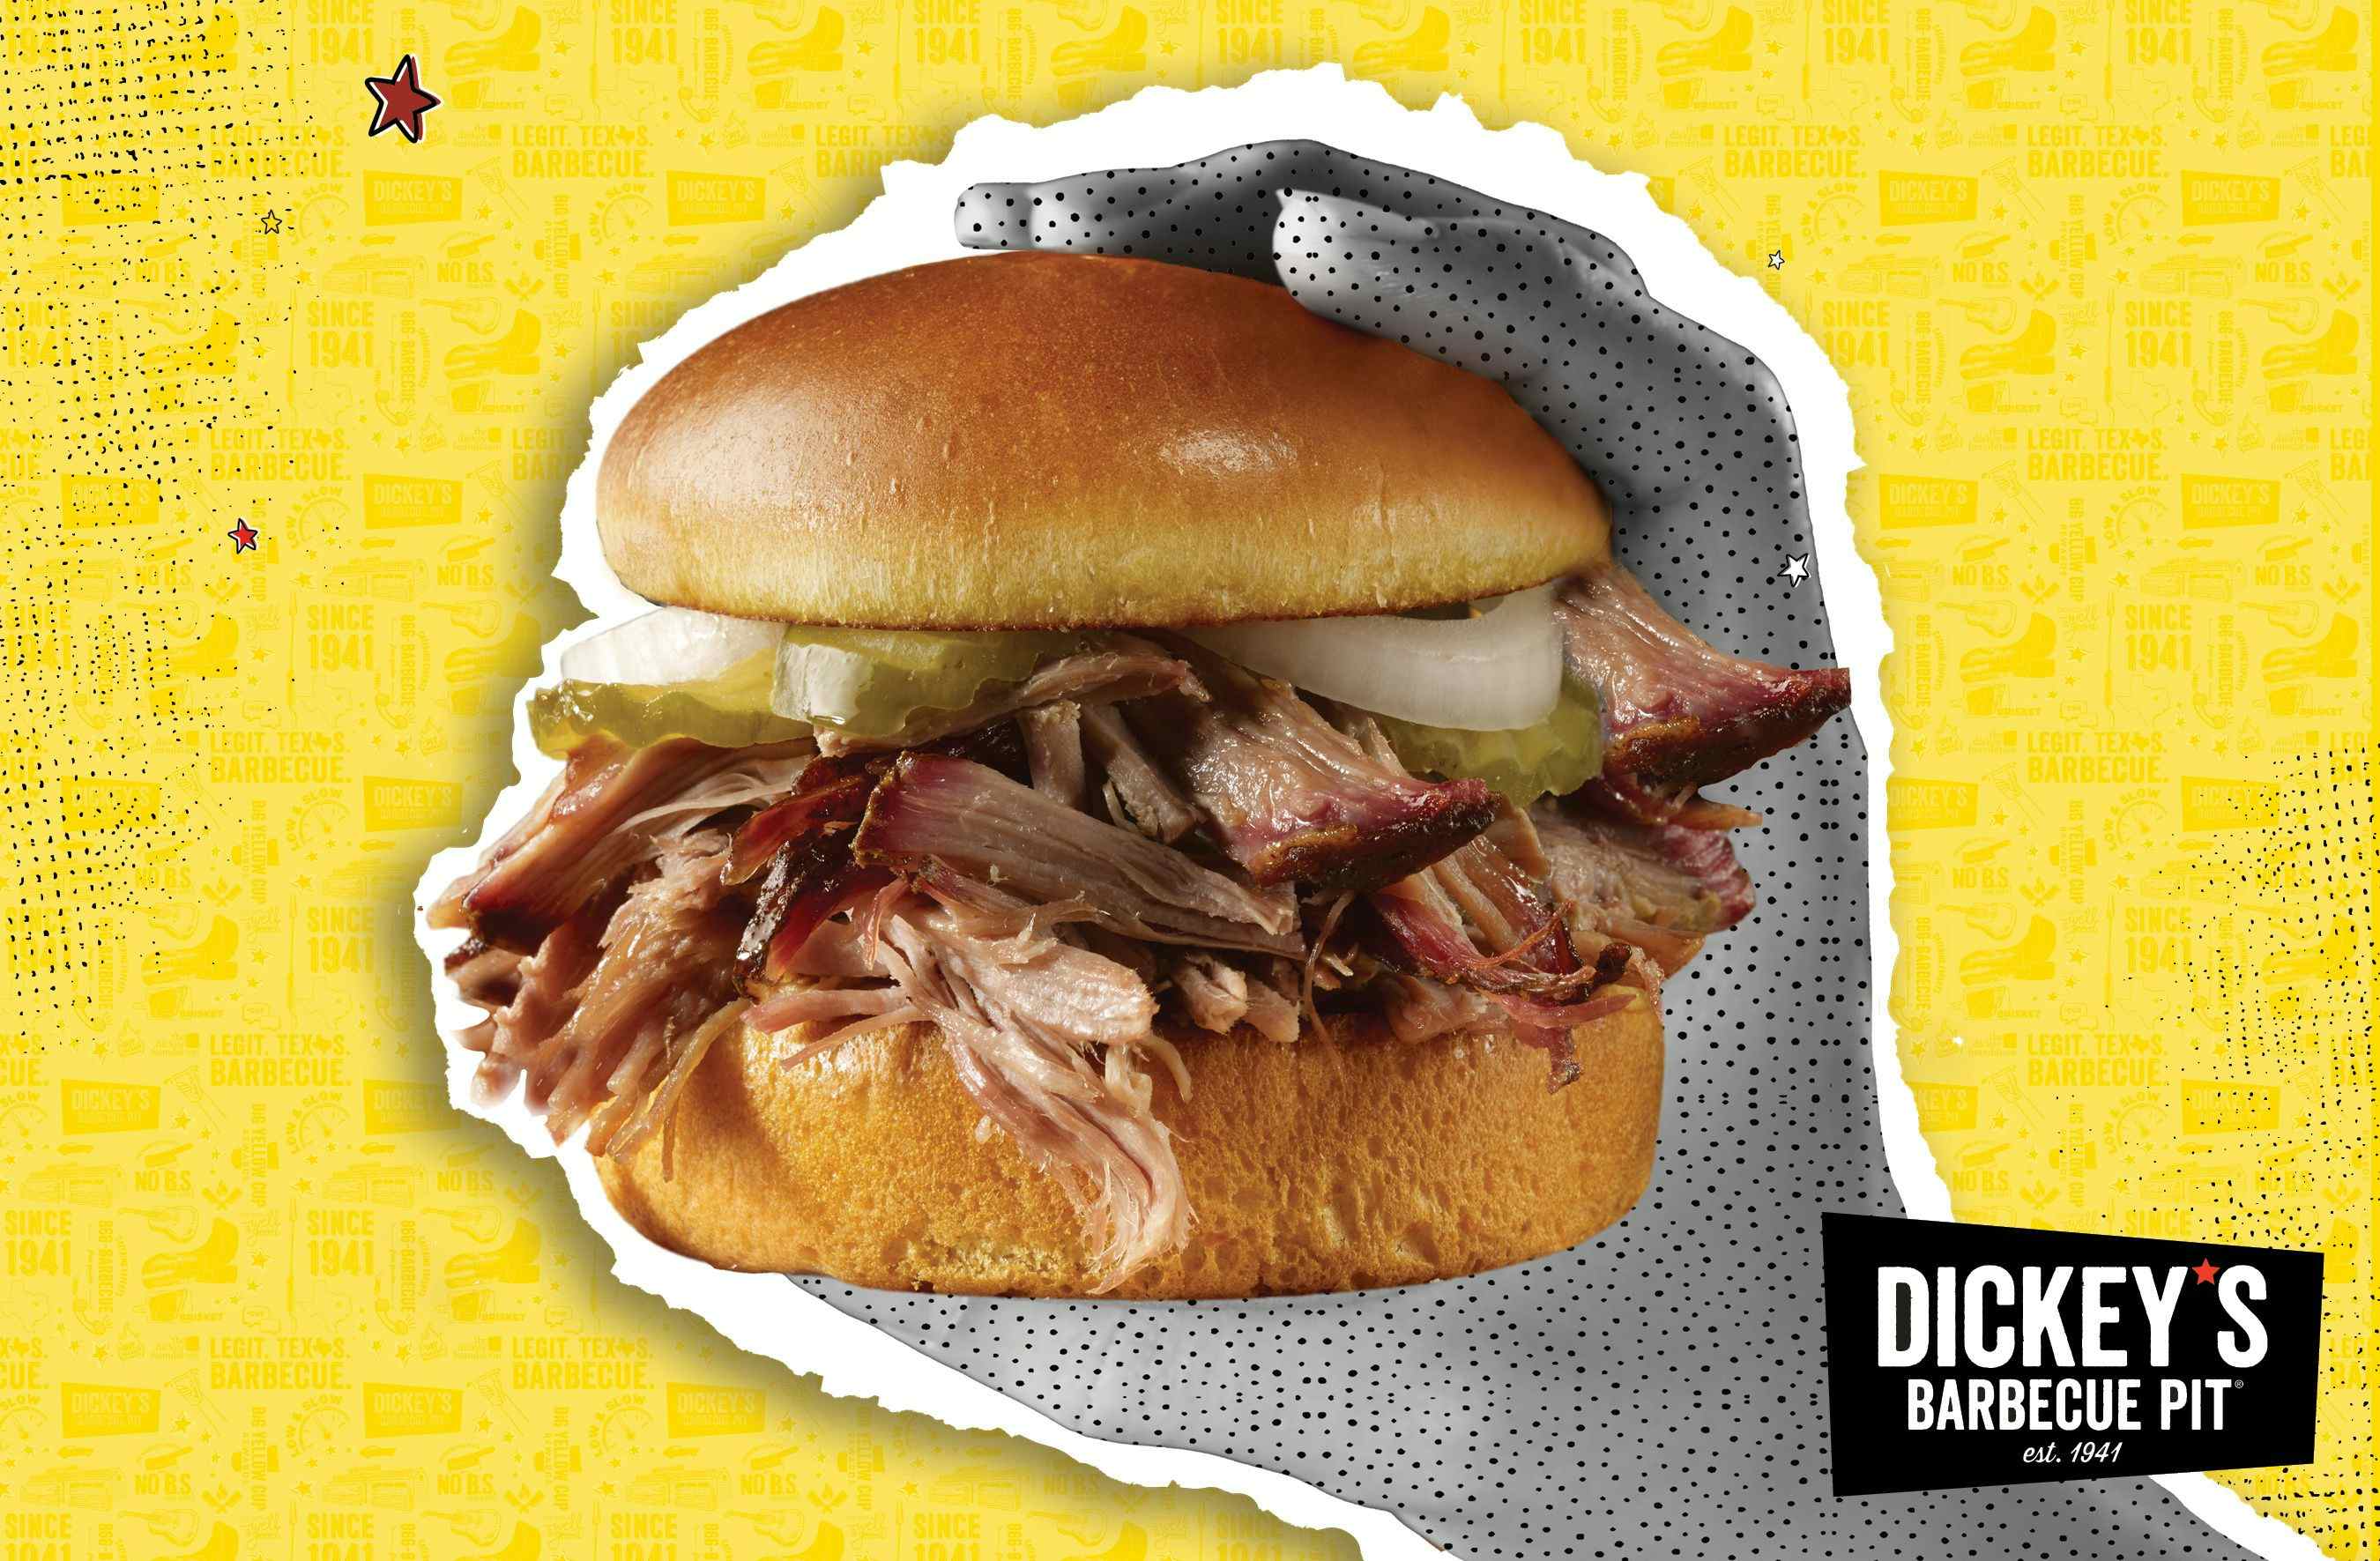 Dickey’s Barbecue offering Sandwich Deal and FREE Delivery